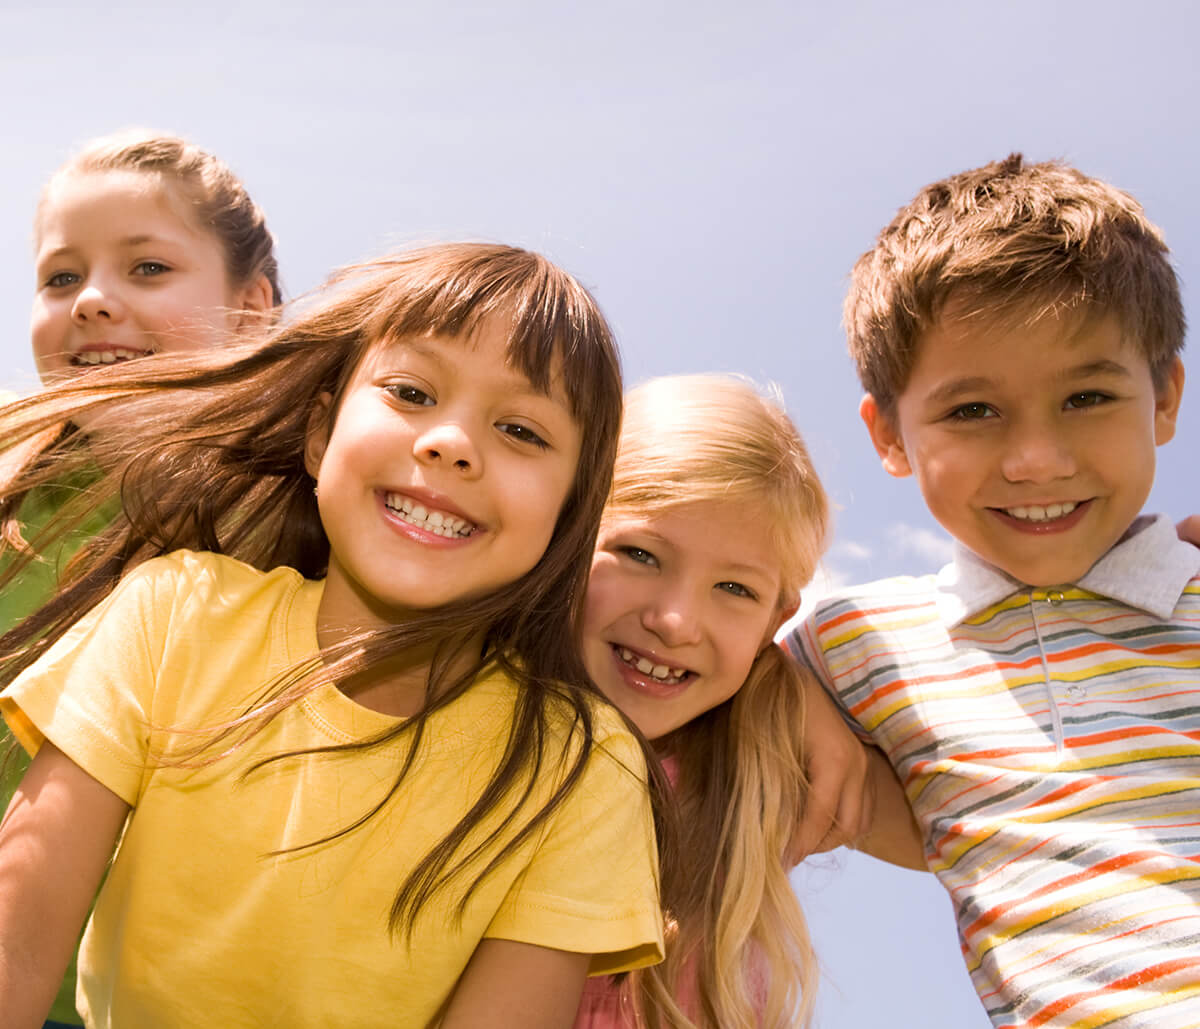 Searching for a Medicaid dentist near me in Fort Worth? Local dentist proudly accepts plans for children